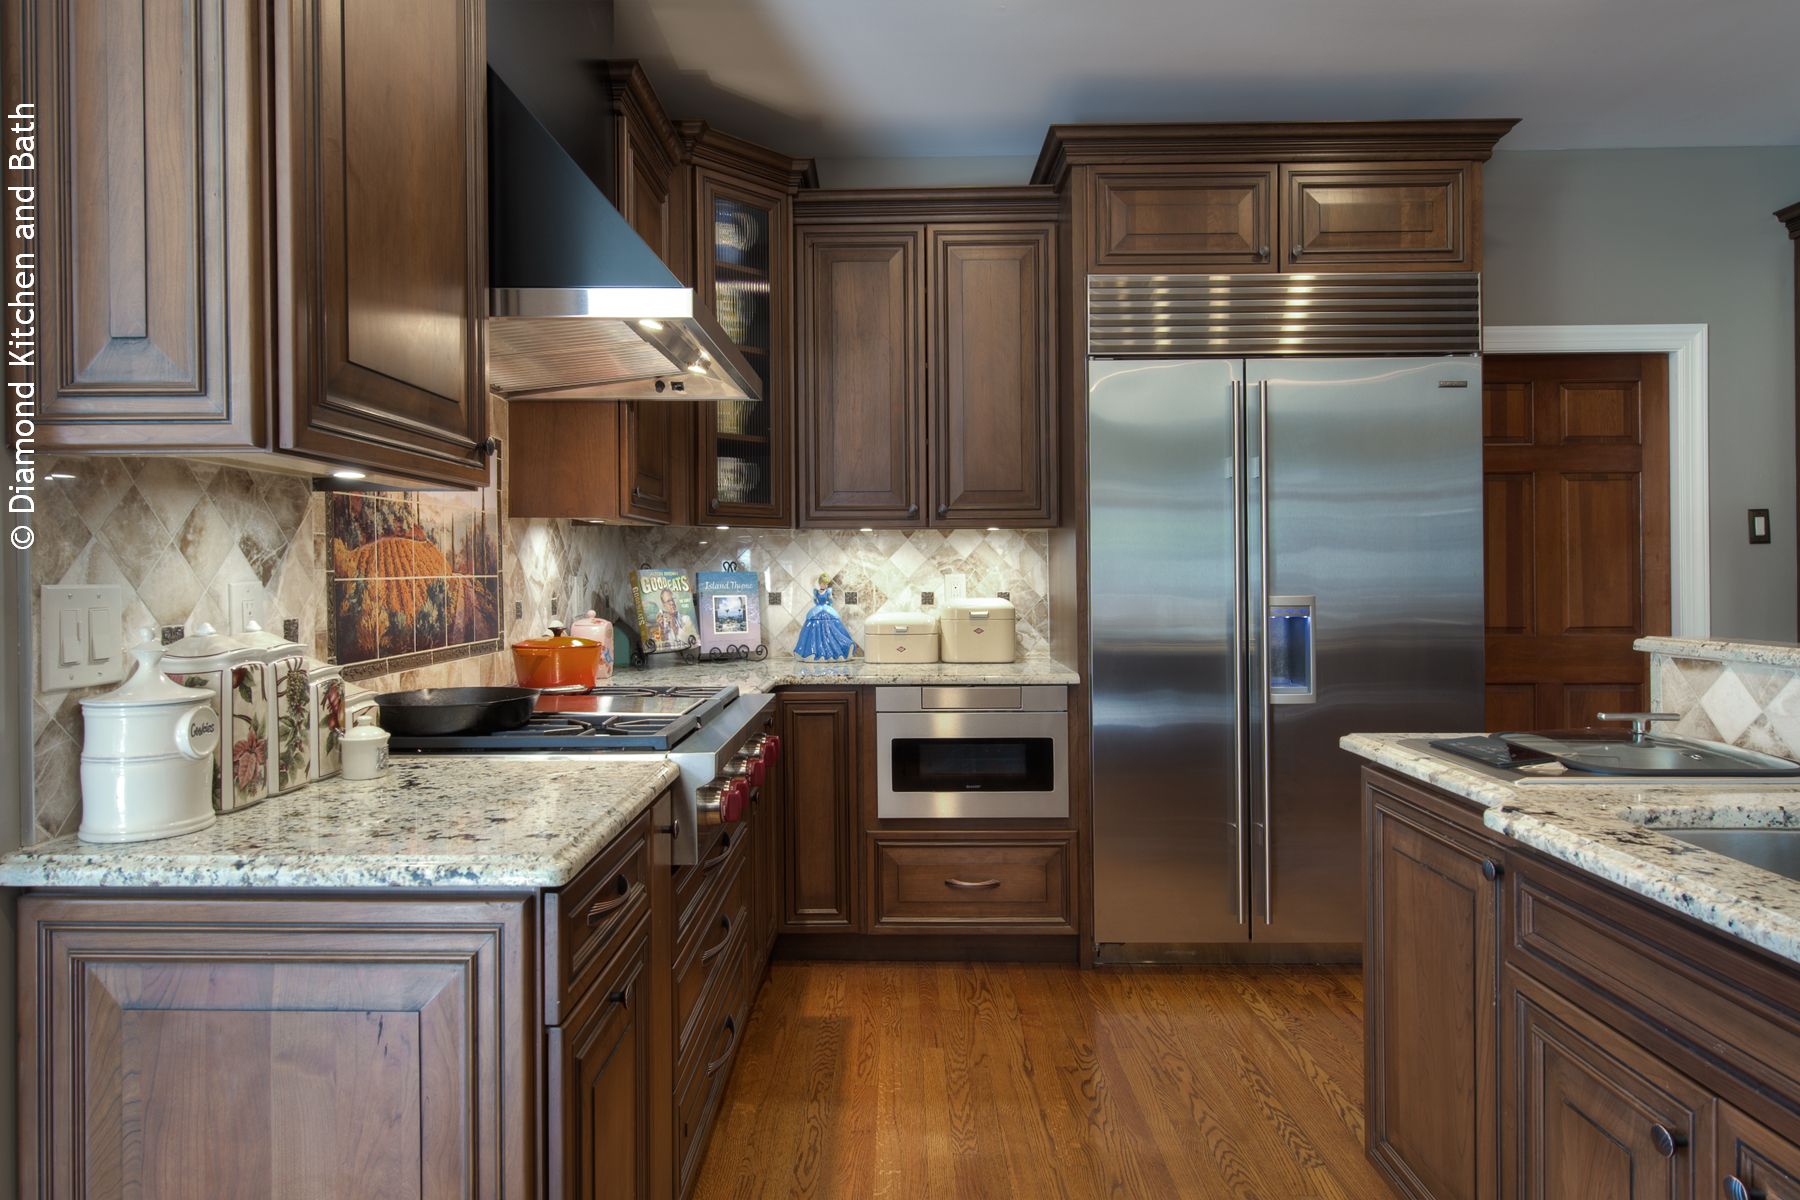 Kitchen Remodeling Virtual Tour in Upper Makefield, PA